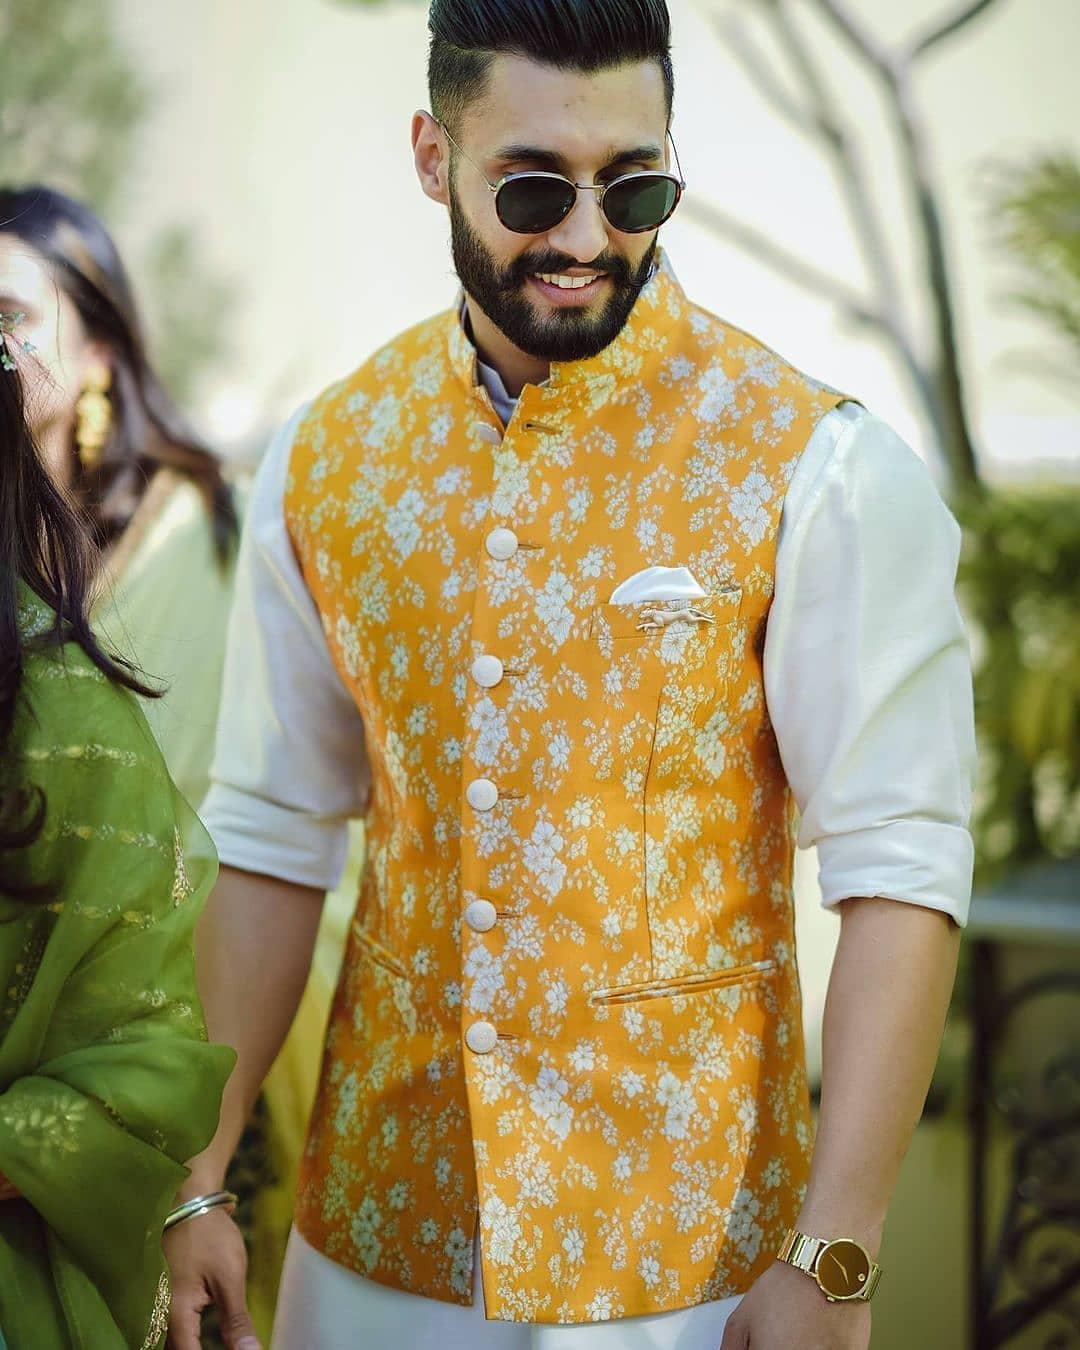 Wedding Attire For Men: Buy Indian Marriage Outfits Online | Utsav Fashion